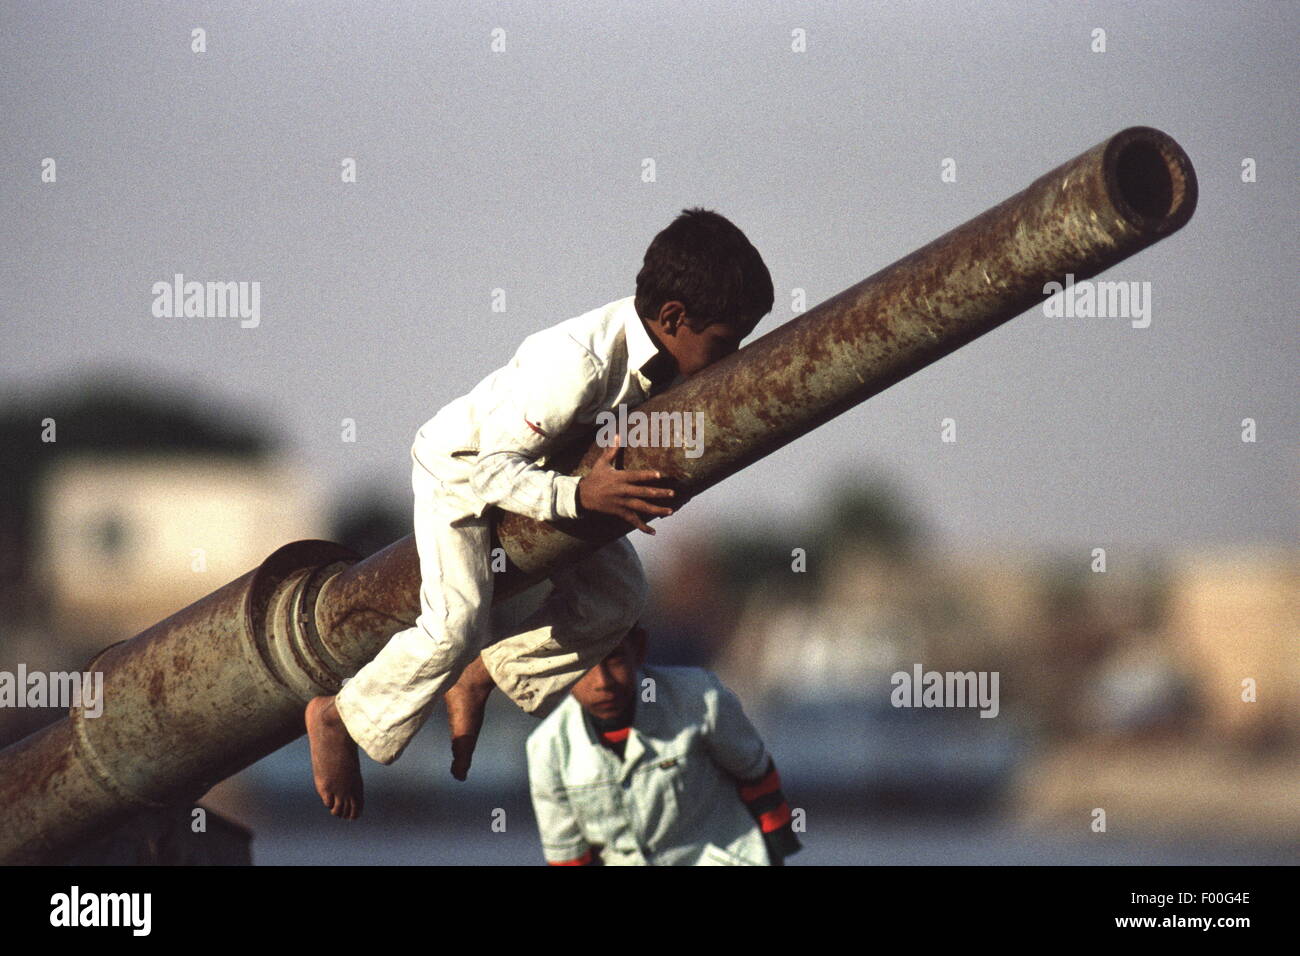 Suez Canal, Egypt - Egyptian children play on a ruined tank at the southern end of the Suez Canal, witness to wars past between Egypt and Israel.   The Suez Canal was closed to shipping from 1967 until the late 1970s, due to the debris of sunken ships in the canal.  One of the marvels of engineering constructed in 1869 by Frenchman Ferdinand de Lesseps, it is today undergoing a signficant upgrade by adding a parallel canal to increase two-way shipping traffic and lessen waiting times. Stock Photo